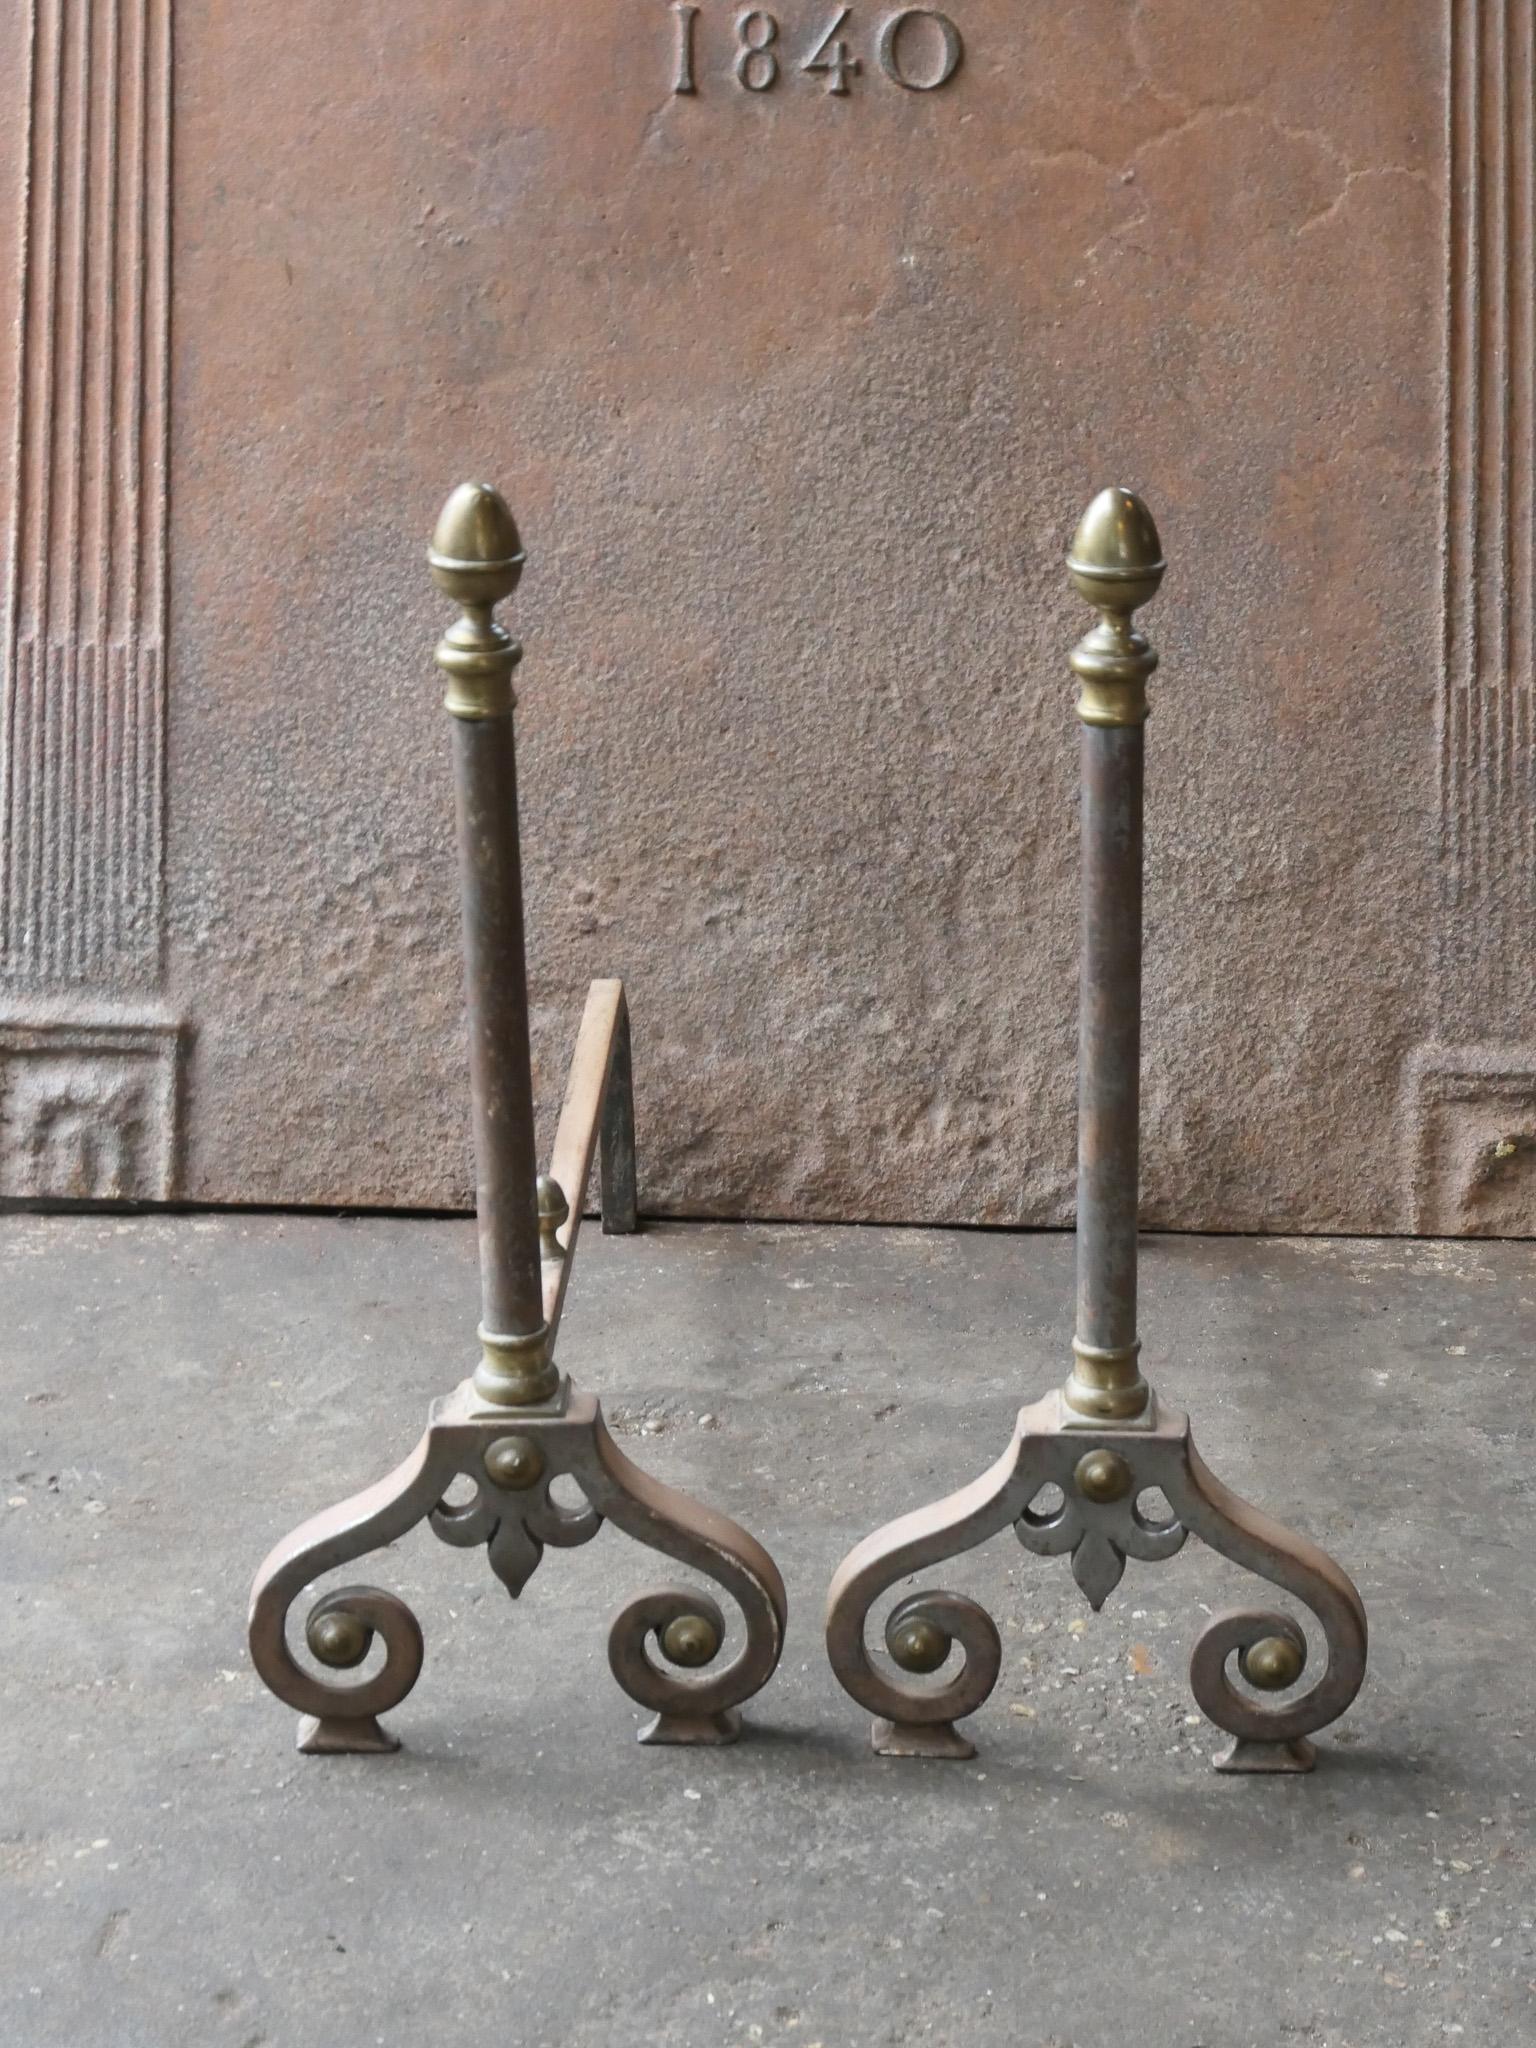 19th - 20th century French Napoleon III style andirons. The andirons are made of brass and wrought iron and are in a good condition.

